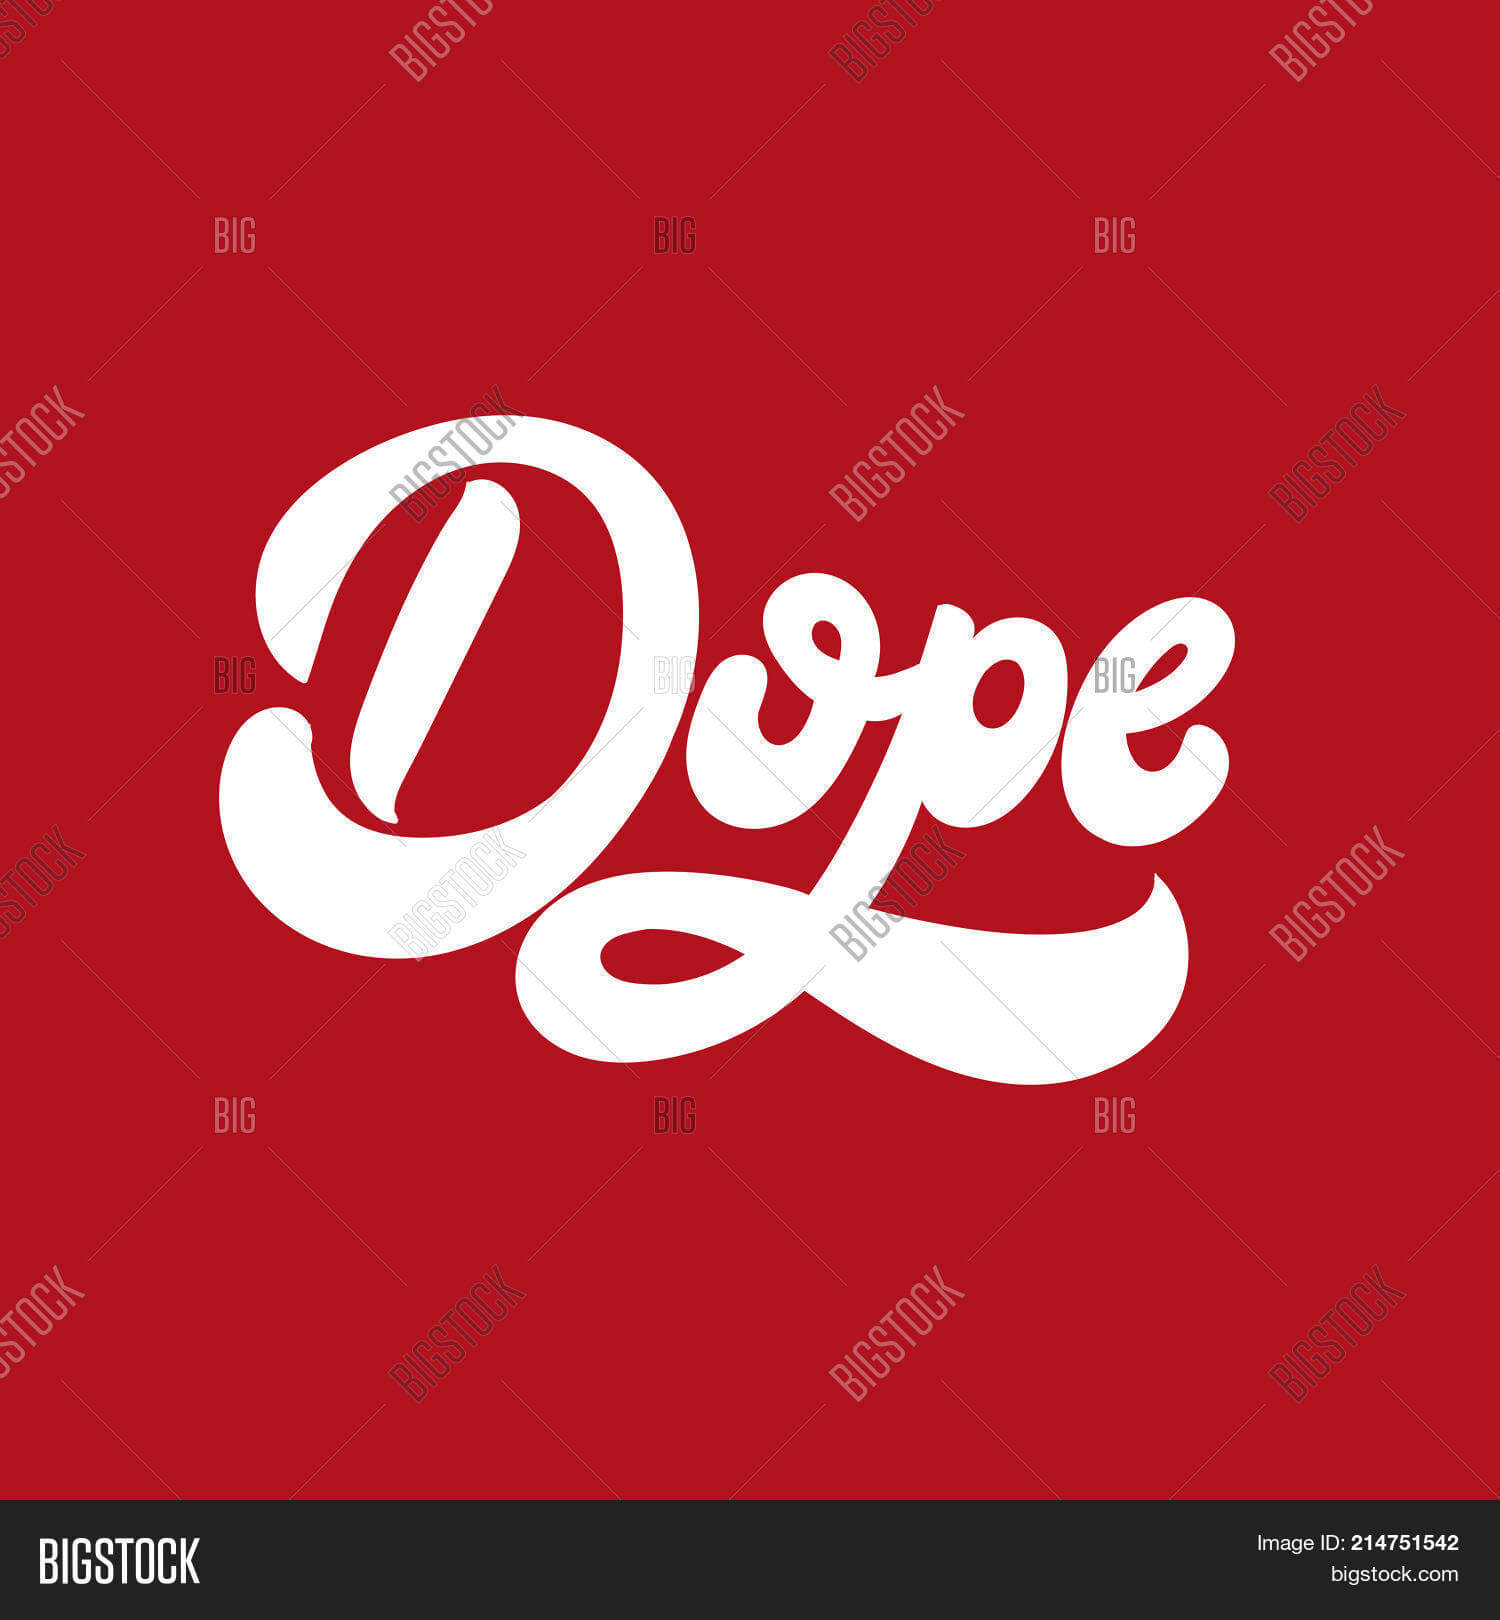 Dope. Vector Vector & Photo (Free Trial) | Bigstock Within Dope Card Template